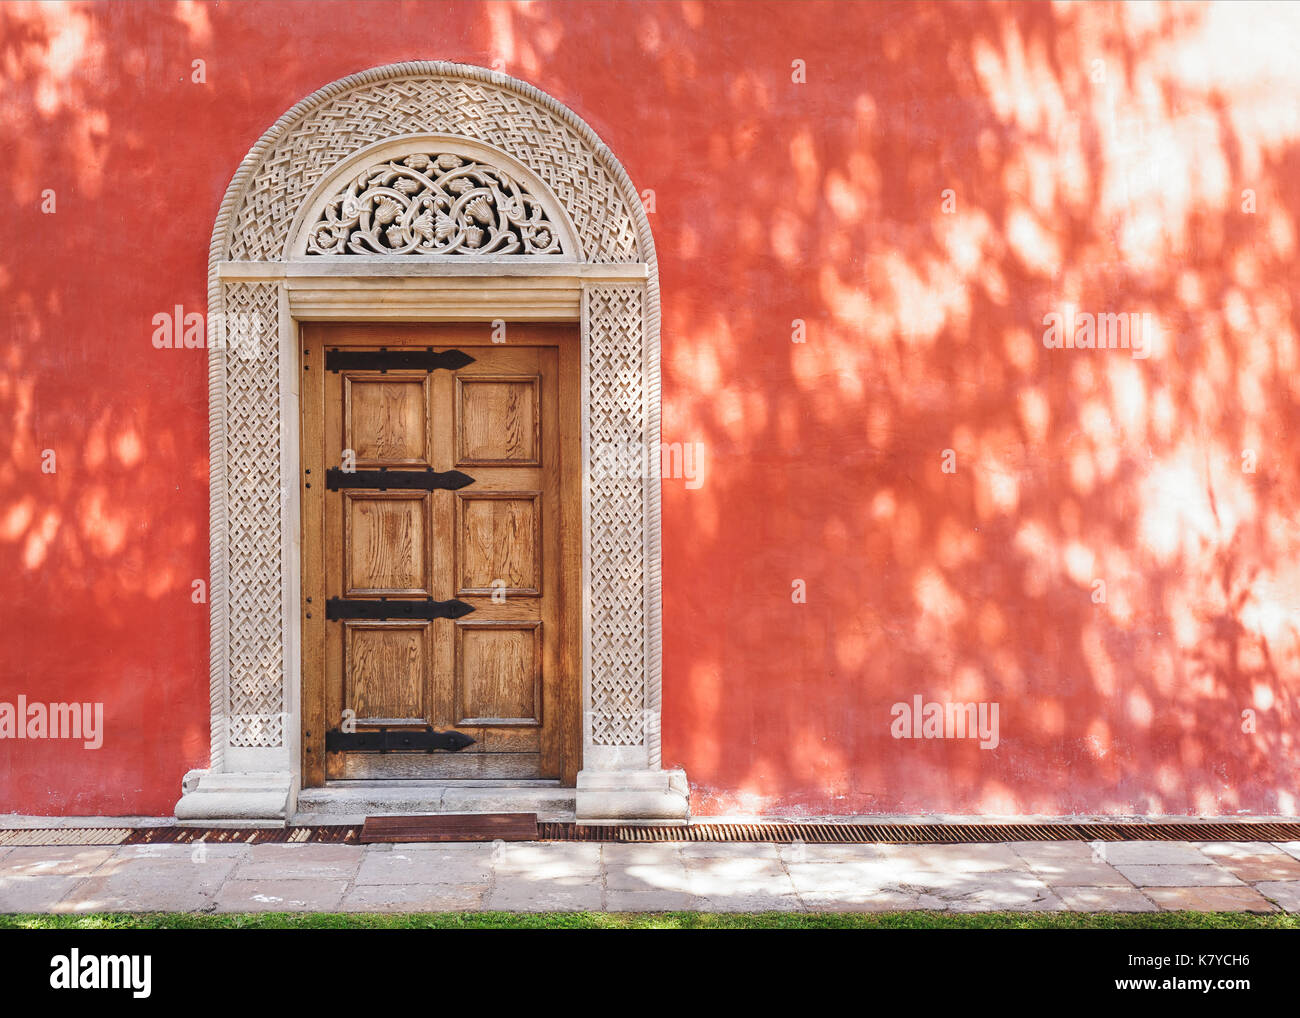 Zica monastery, 13th century, carved medieval stone door in the red stucco wall, architecture detail Stock Photo